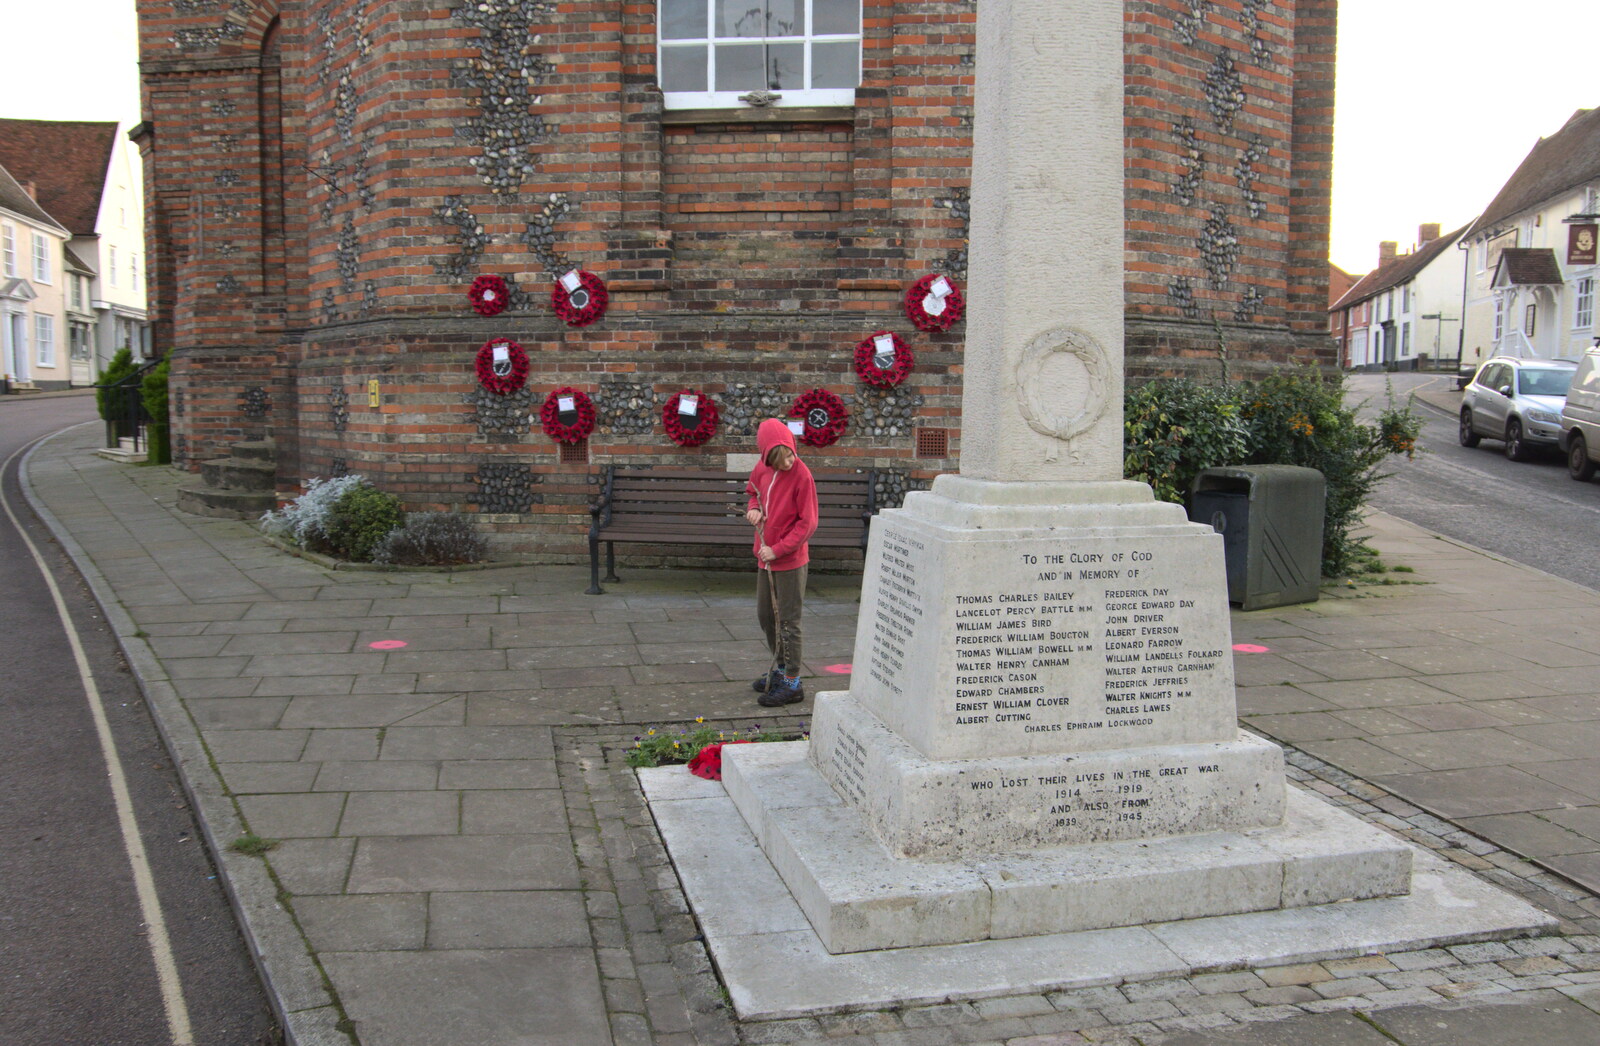 Harry looks at the War Memorial from The Dereliction of Eye, Suffolk - 22nd November 2020